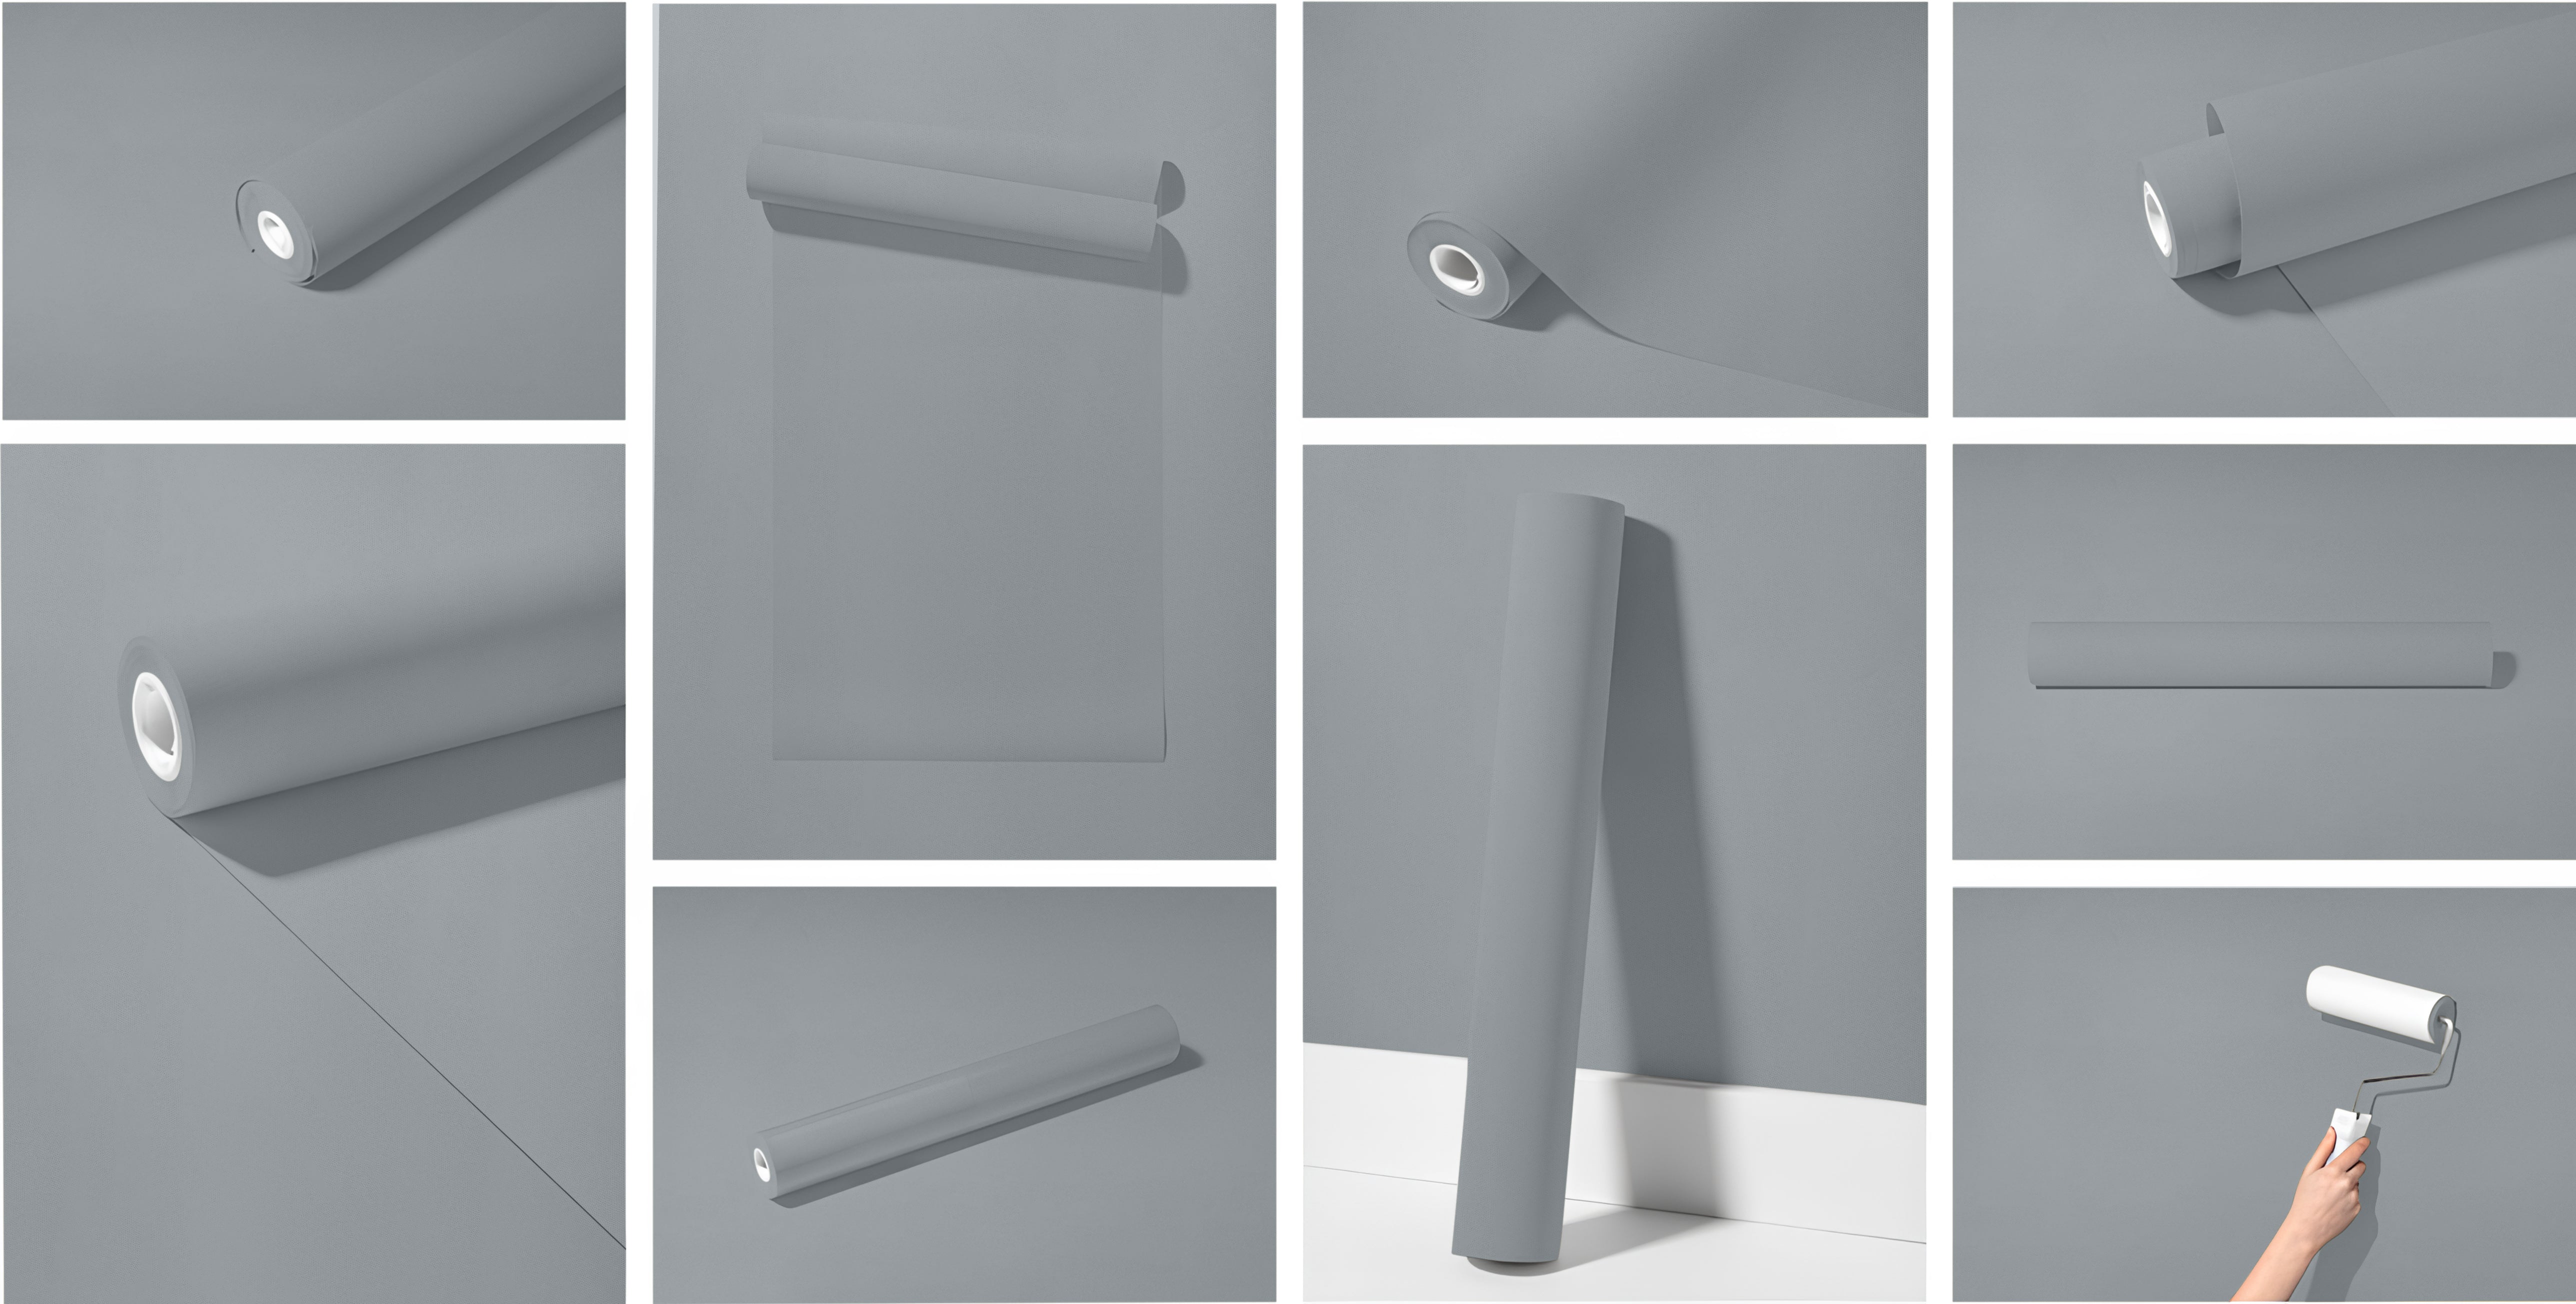 Peel & Stick Removable Re-usable Paint - Color RAL 7040 Window Grey - offRAL™ - RALRAW LLC, USA